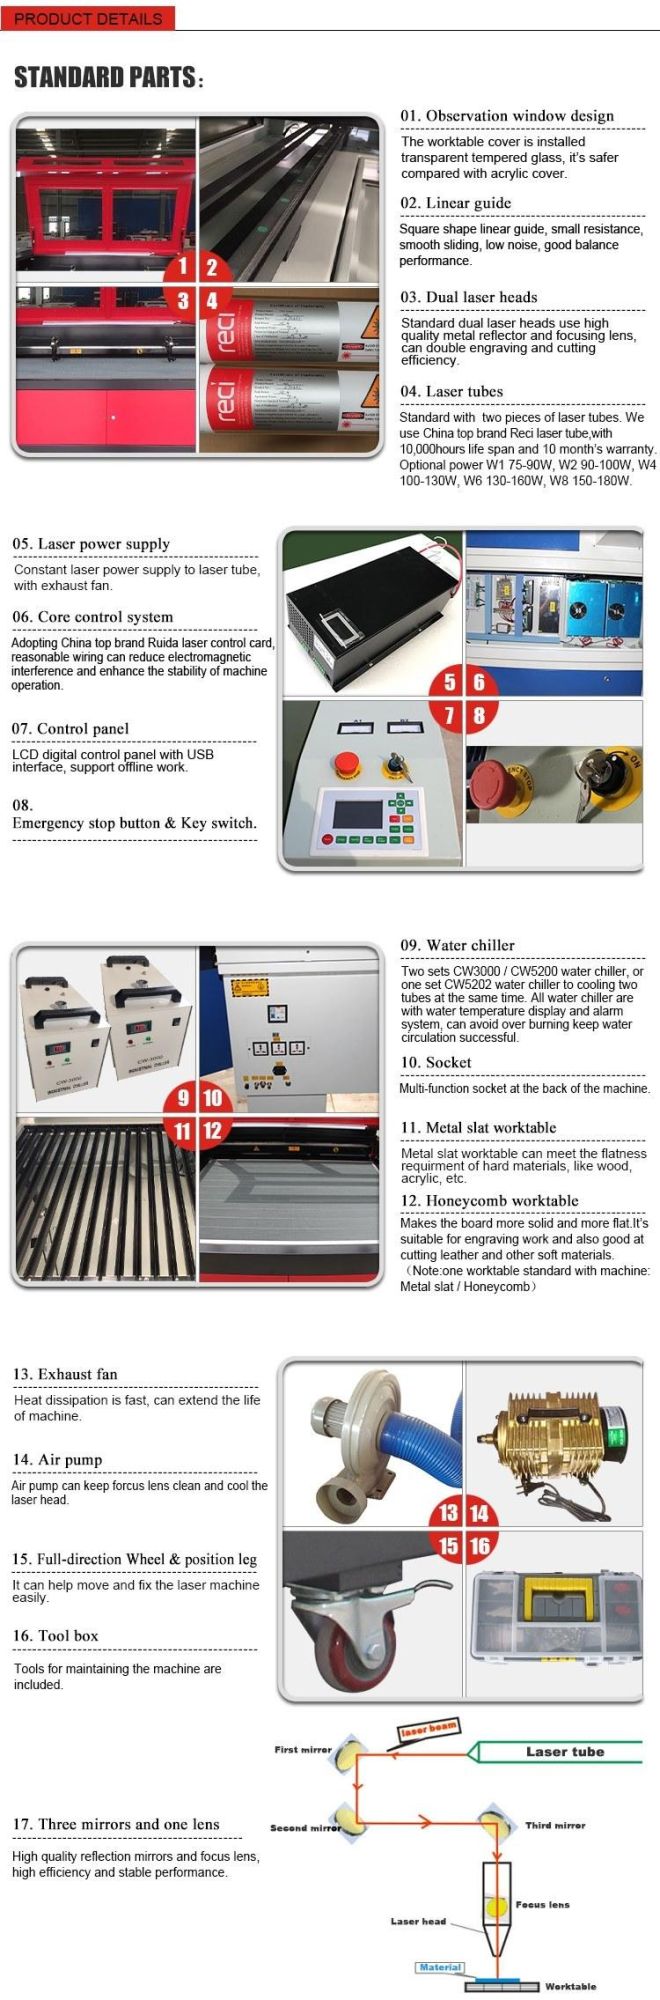 CO2 90W 1390 Two Heads Laser Carving Engraving Machine for MDF